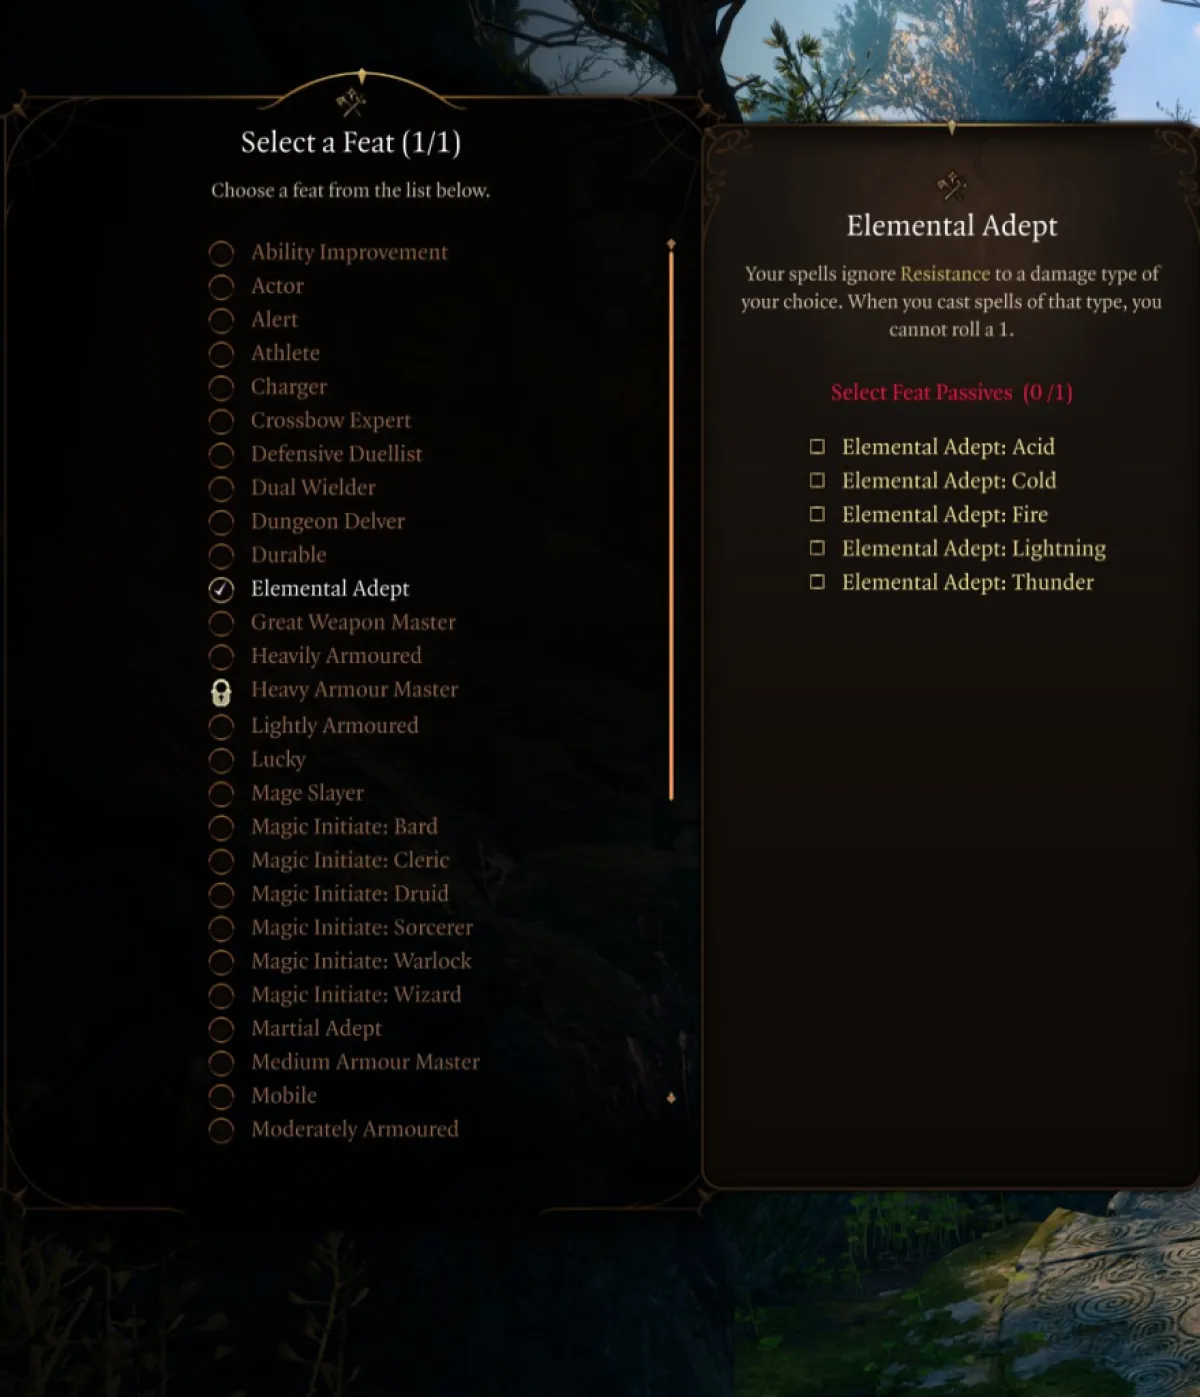 An image showing the Elemental Adept feat in Baldur's Gate 3 BG3 as part of a best builds guide for Druids.